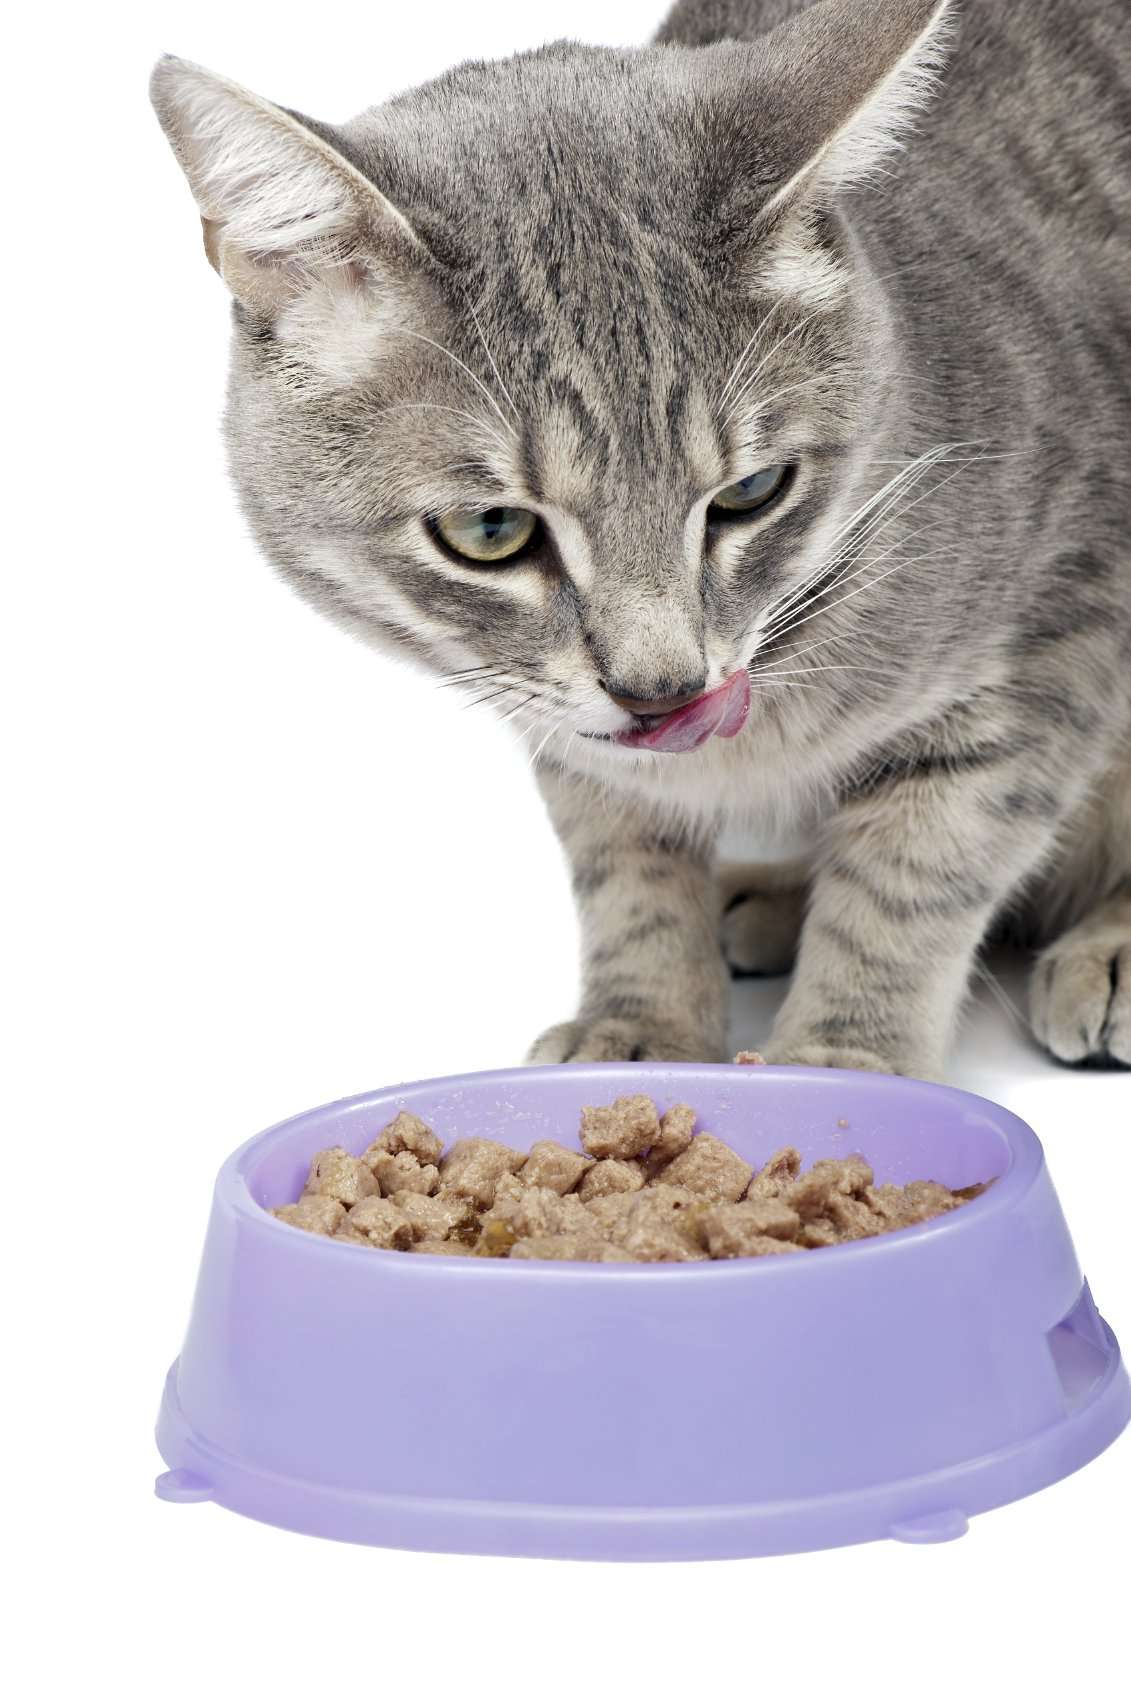 Whatâs the Best Food to Feed Your Cats?